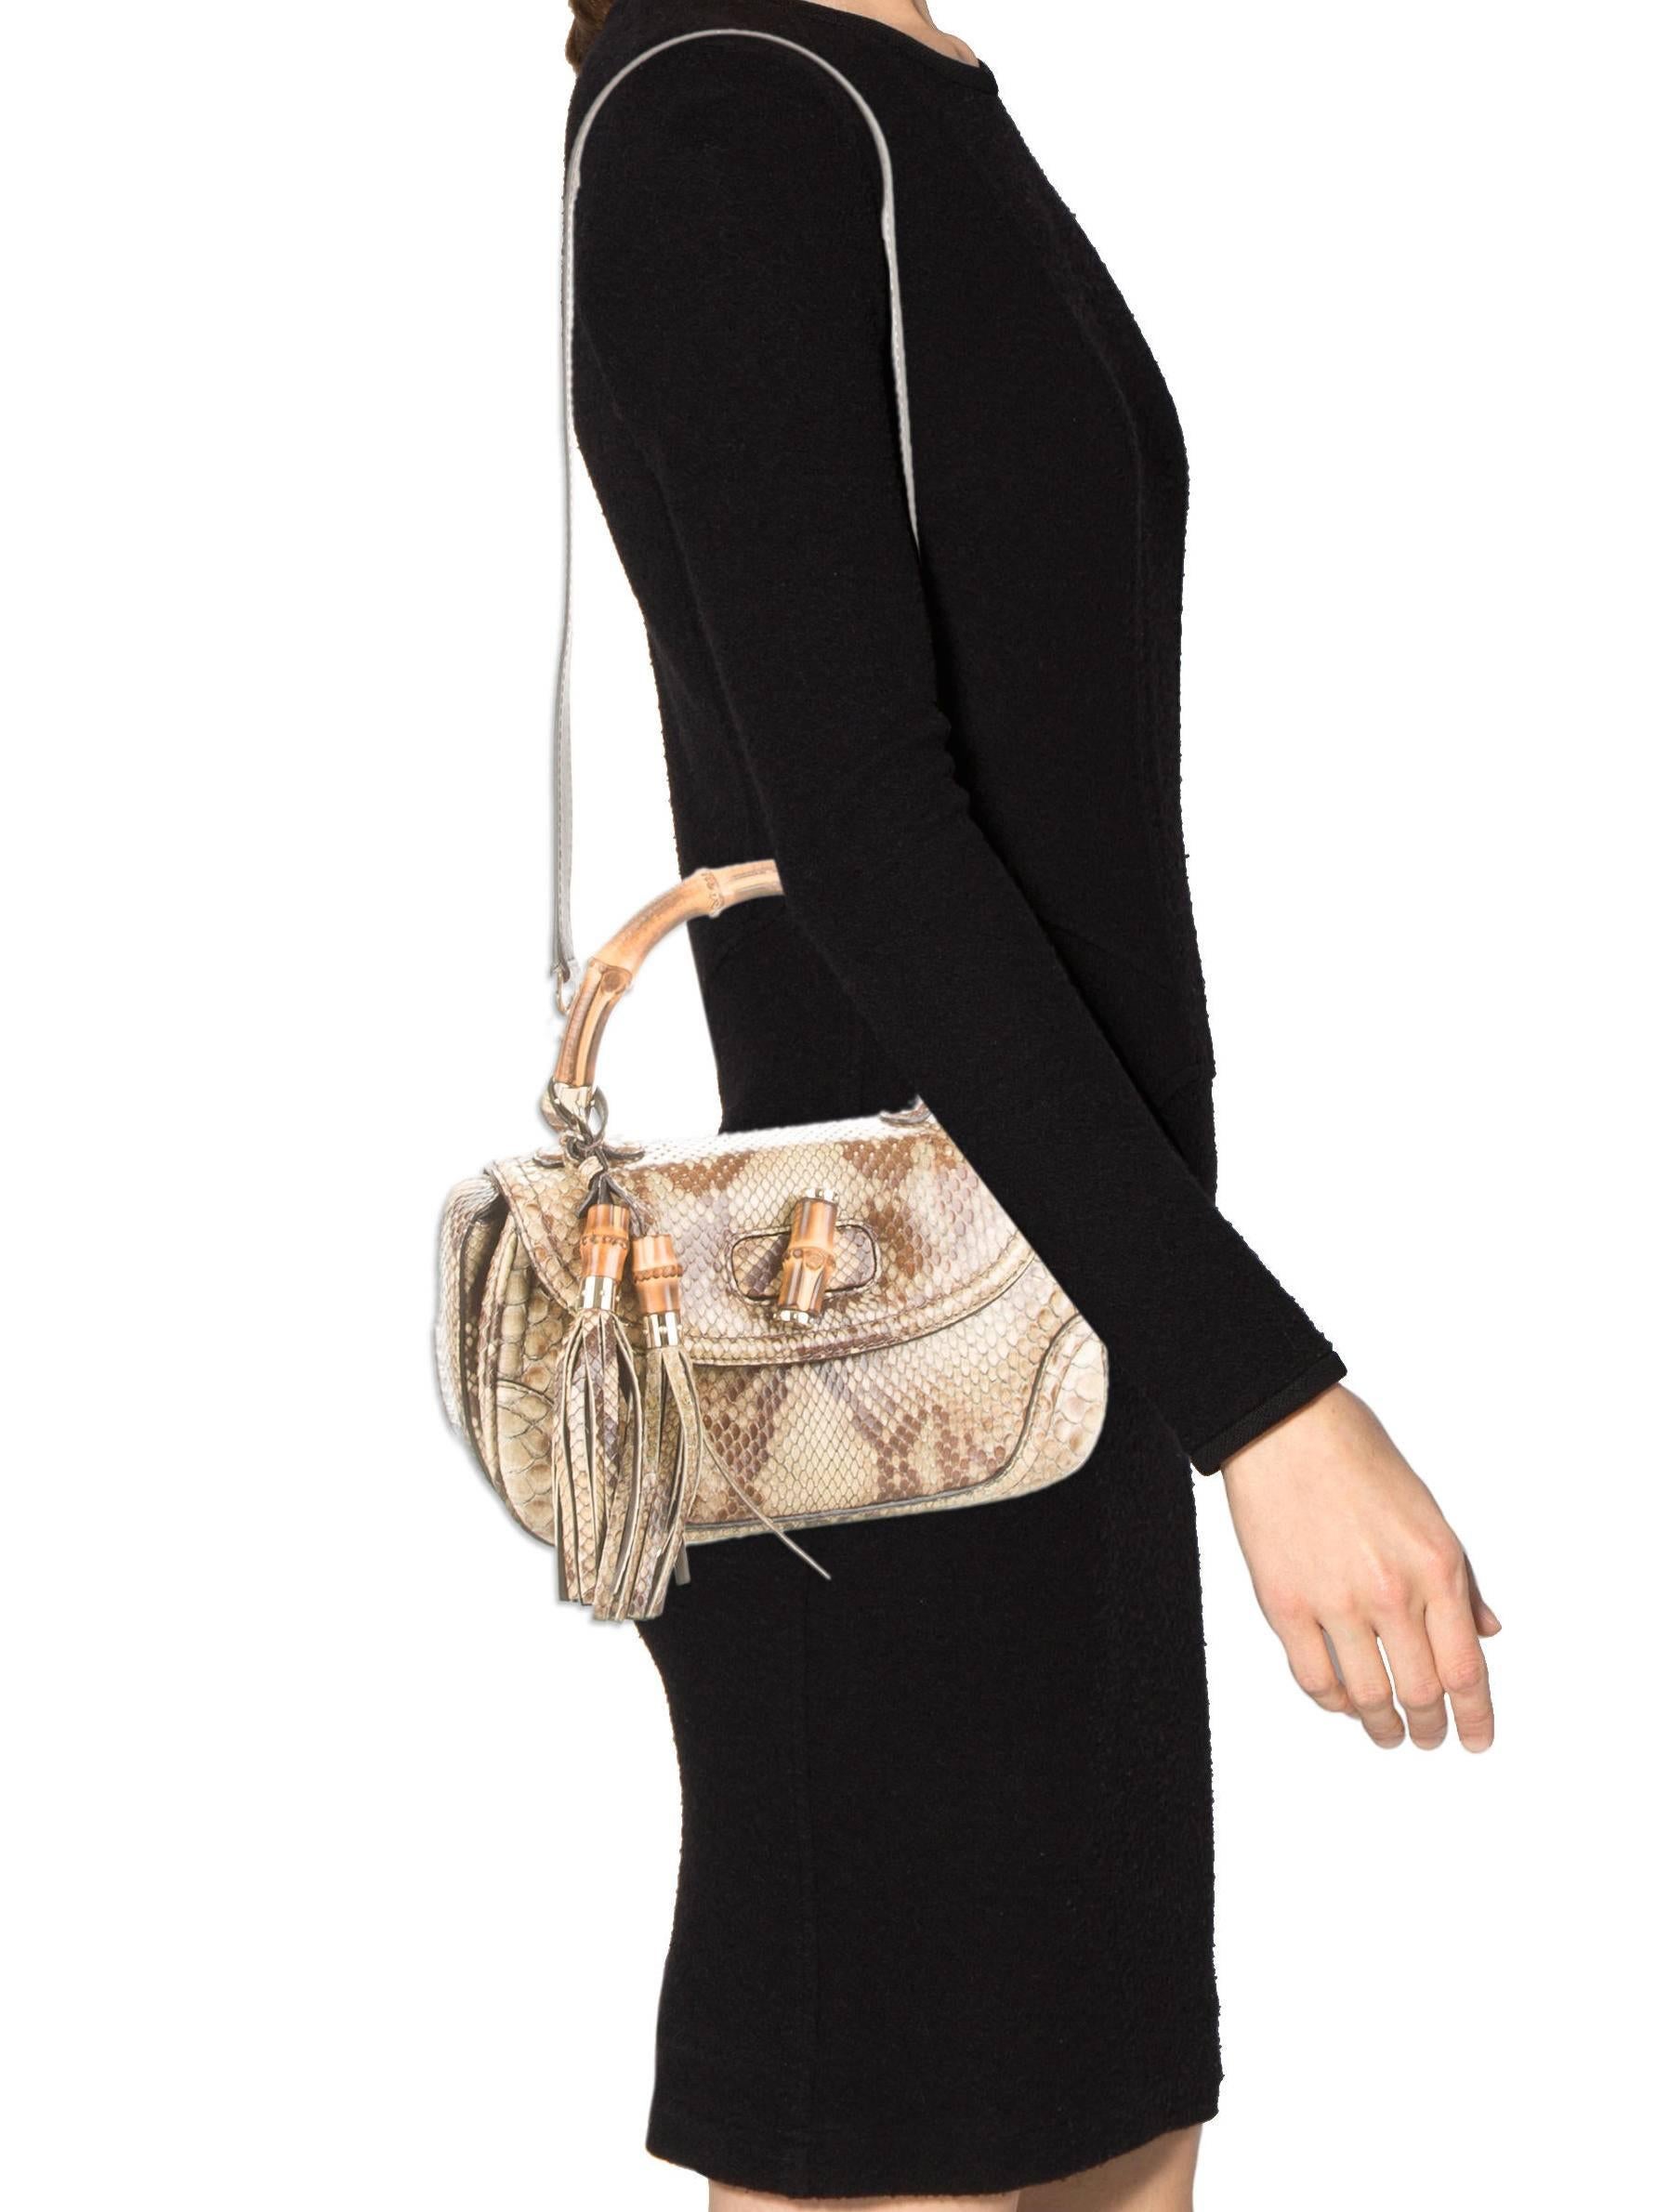 CURATOR'S NOTES

All of your favorites handcrafted into one! Stunning python snakeskin Gucci satchel shoulder bag featuring bamboo top handle and removable shoulder strap.

Style Tip: Dangle it from your wrist or wear it cross body style for